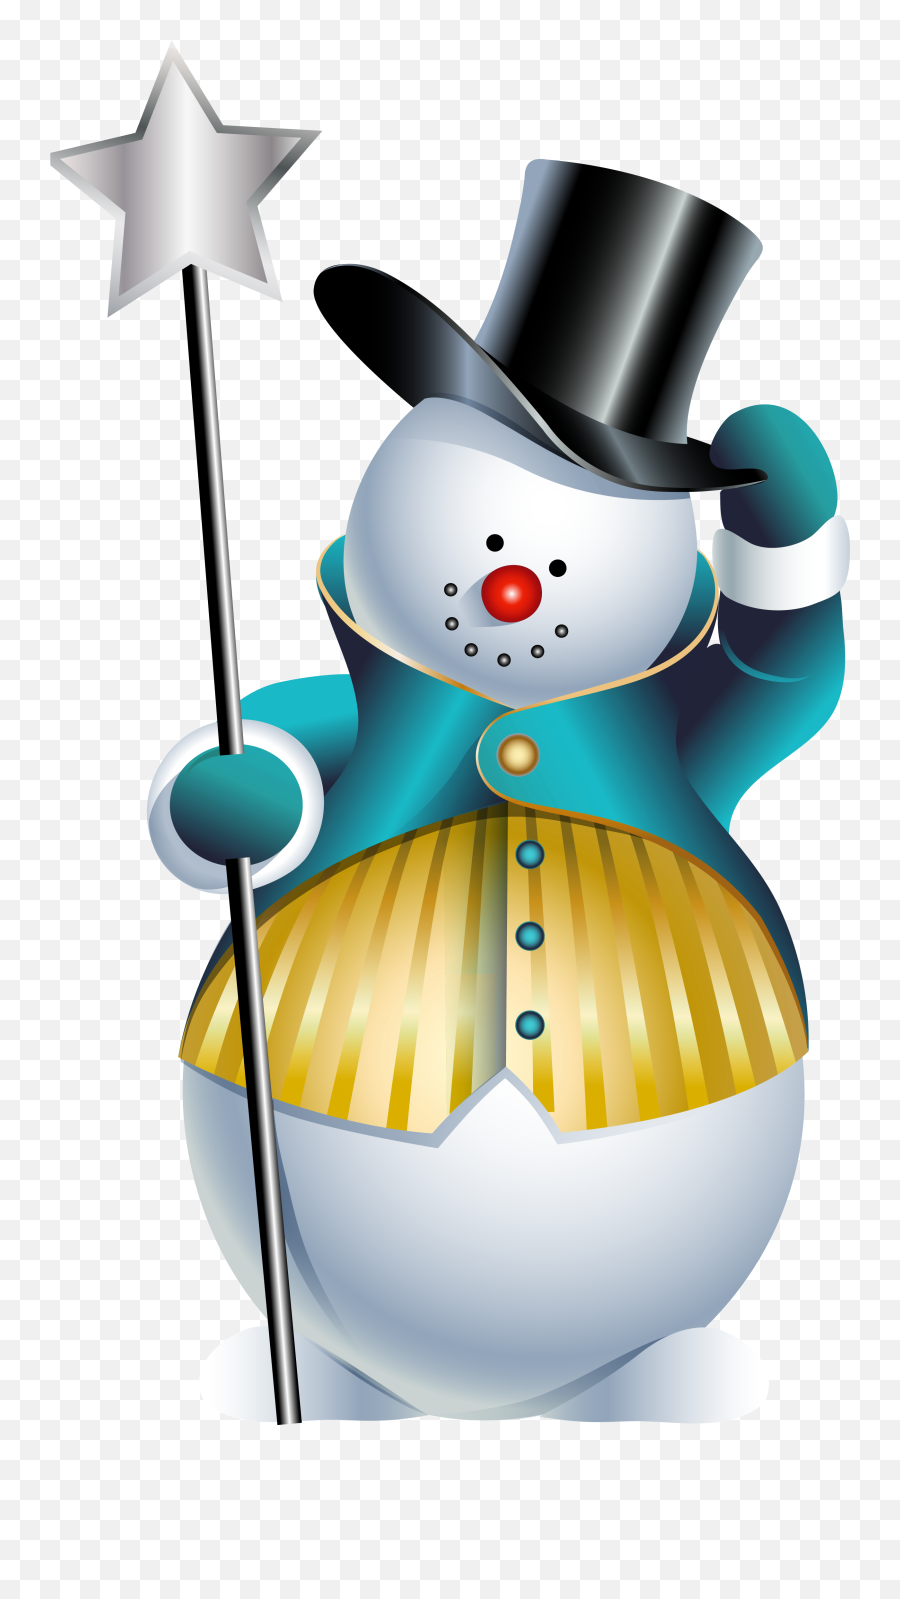 Free Christmas Images Png - Transparent Cute Snowman Clipart,Snowman Clipart Transparent Background